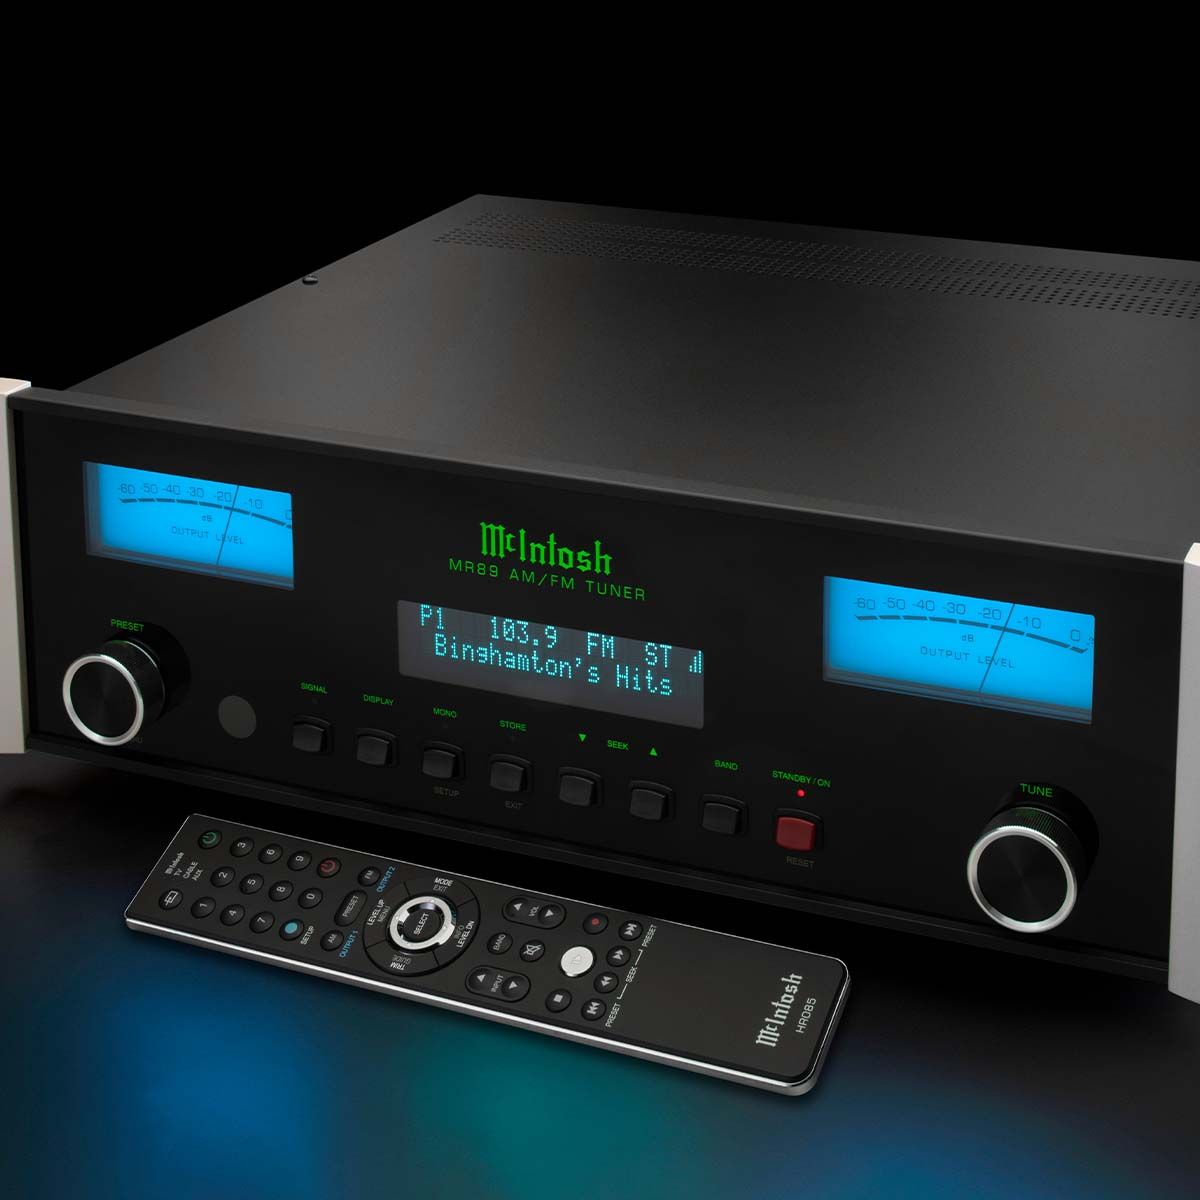 McIntosh MR89 AM/FM Tuner - front panel with remote control